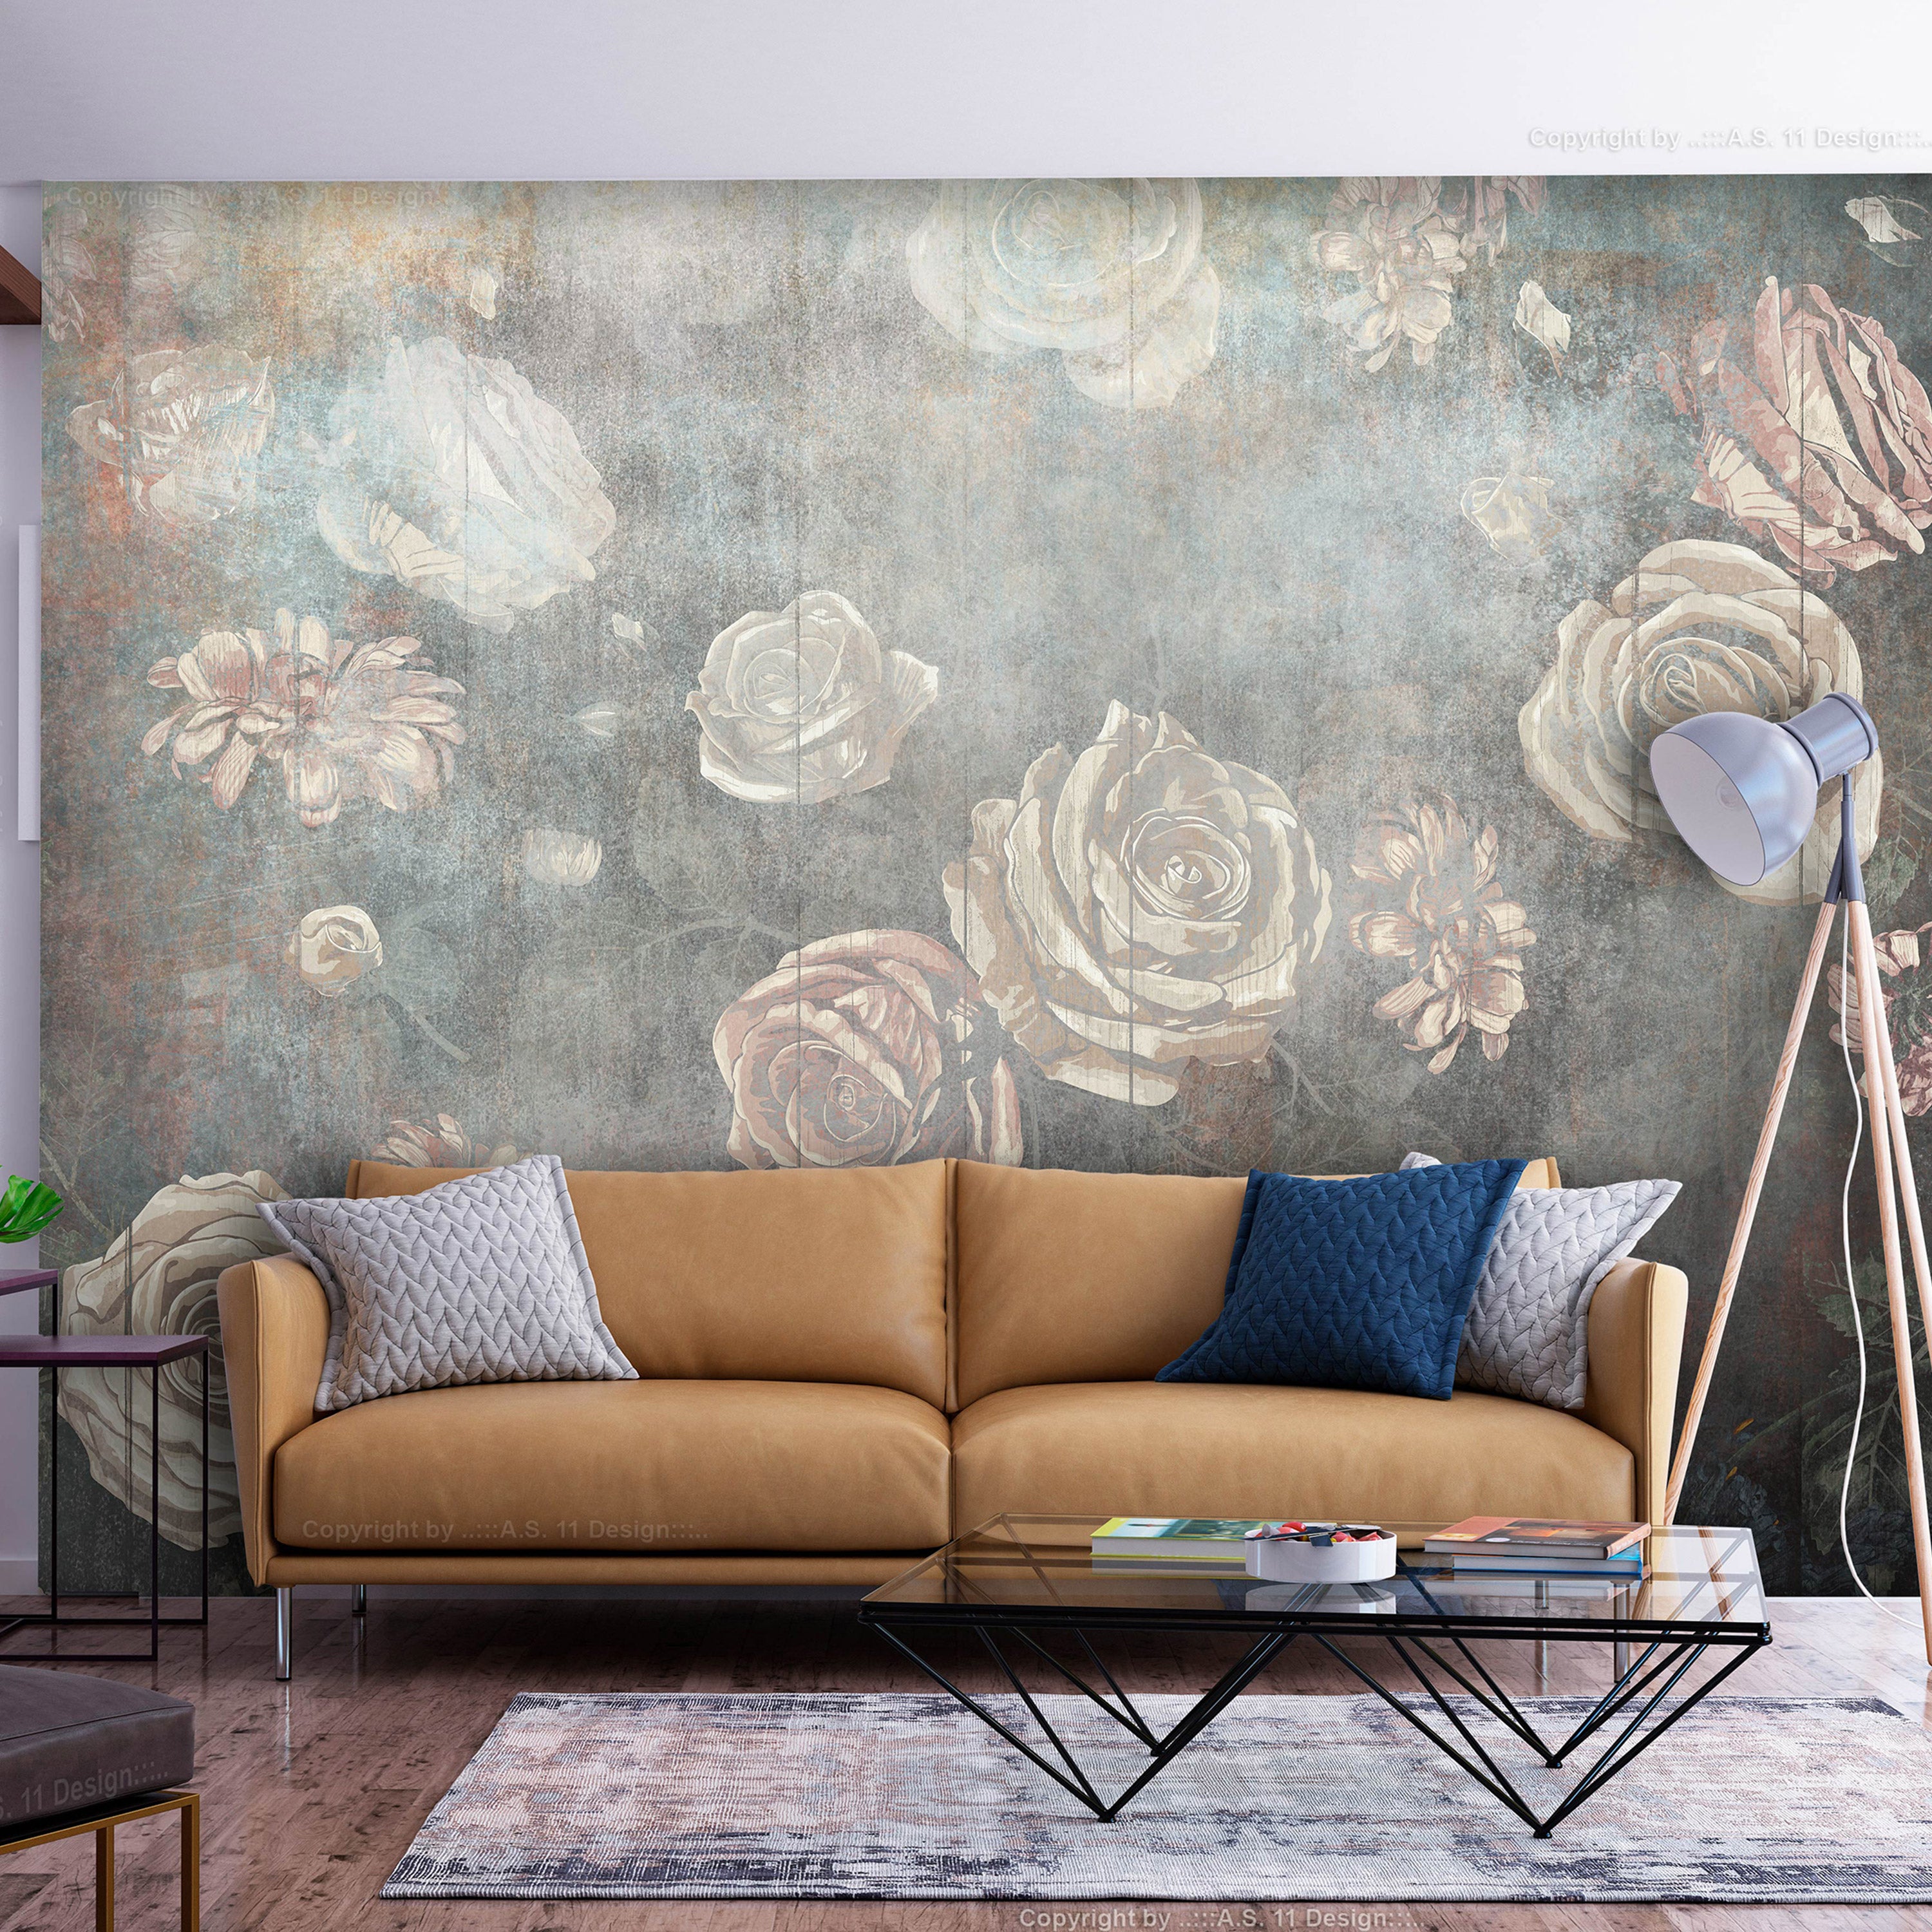 Floral Wallpaper Wall Mural - Misty Roses